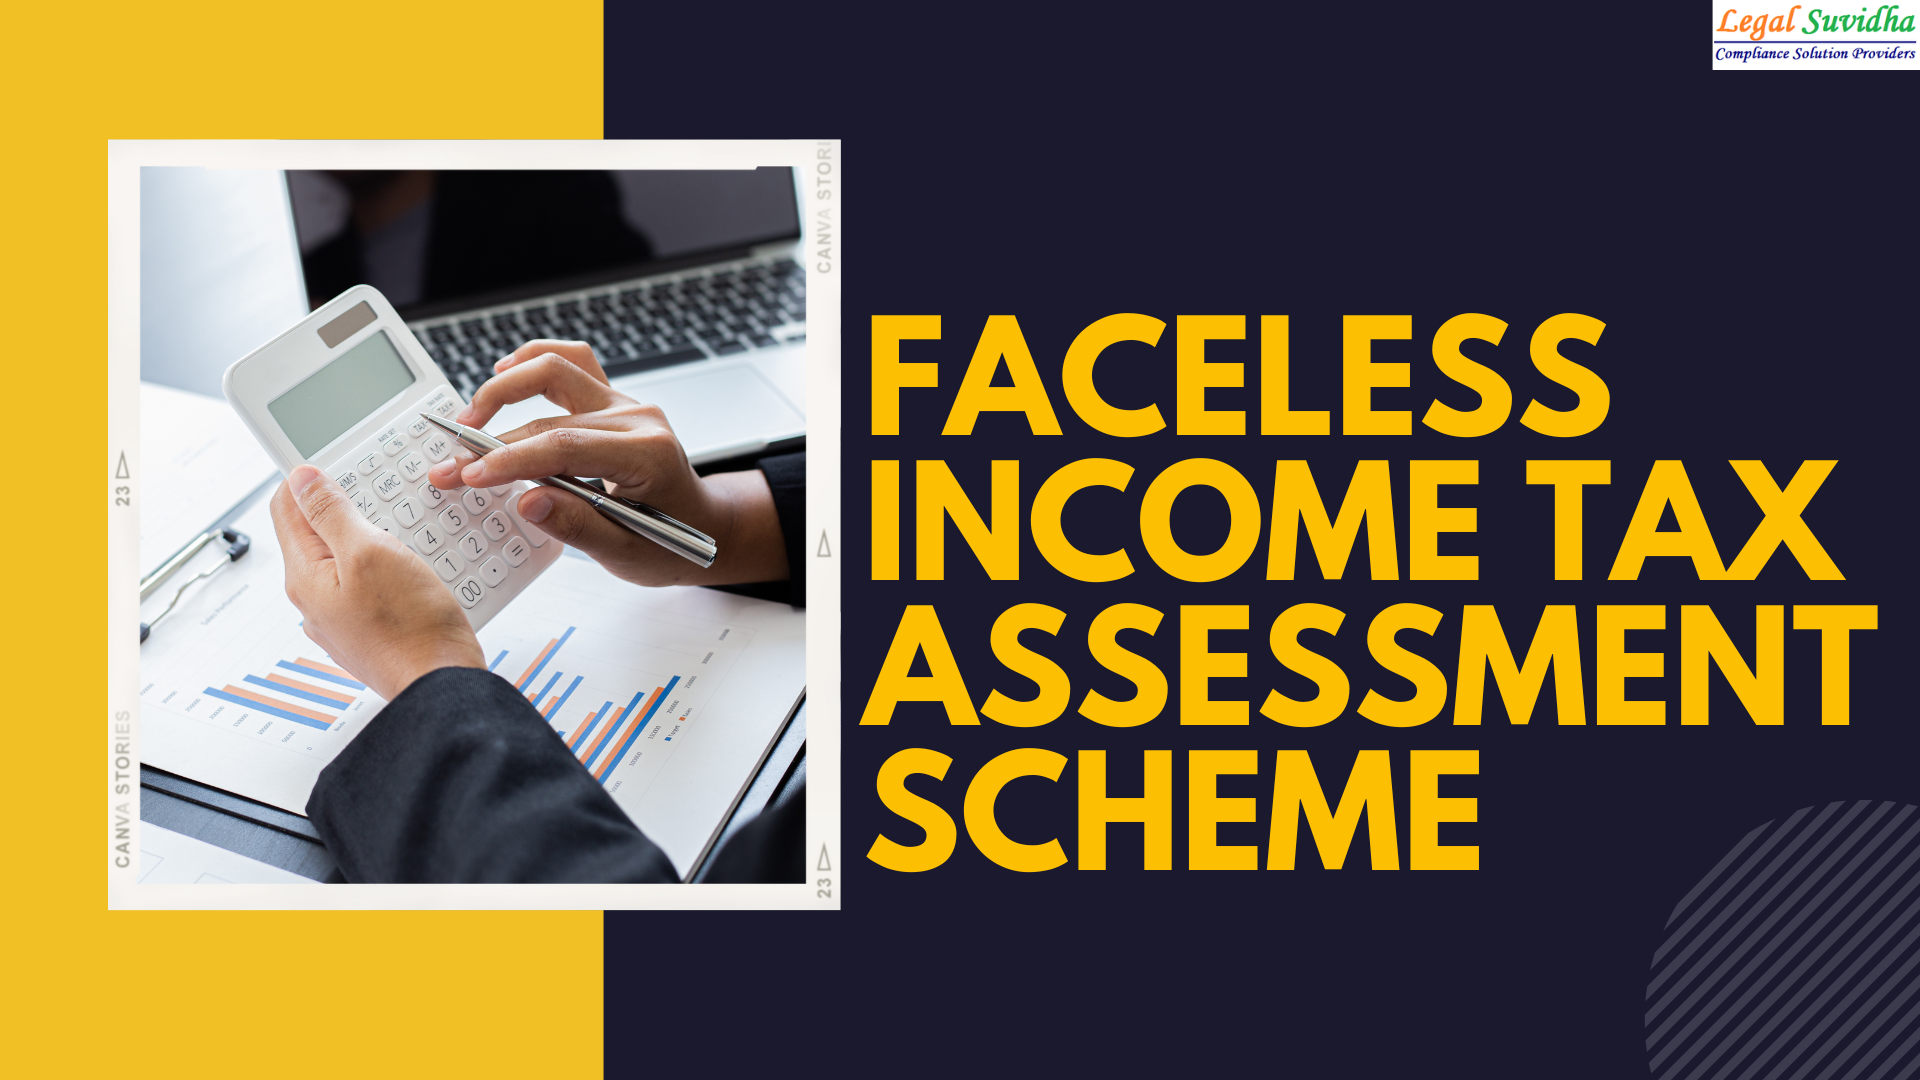 What is Faceless Income Tax Assessment?